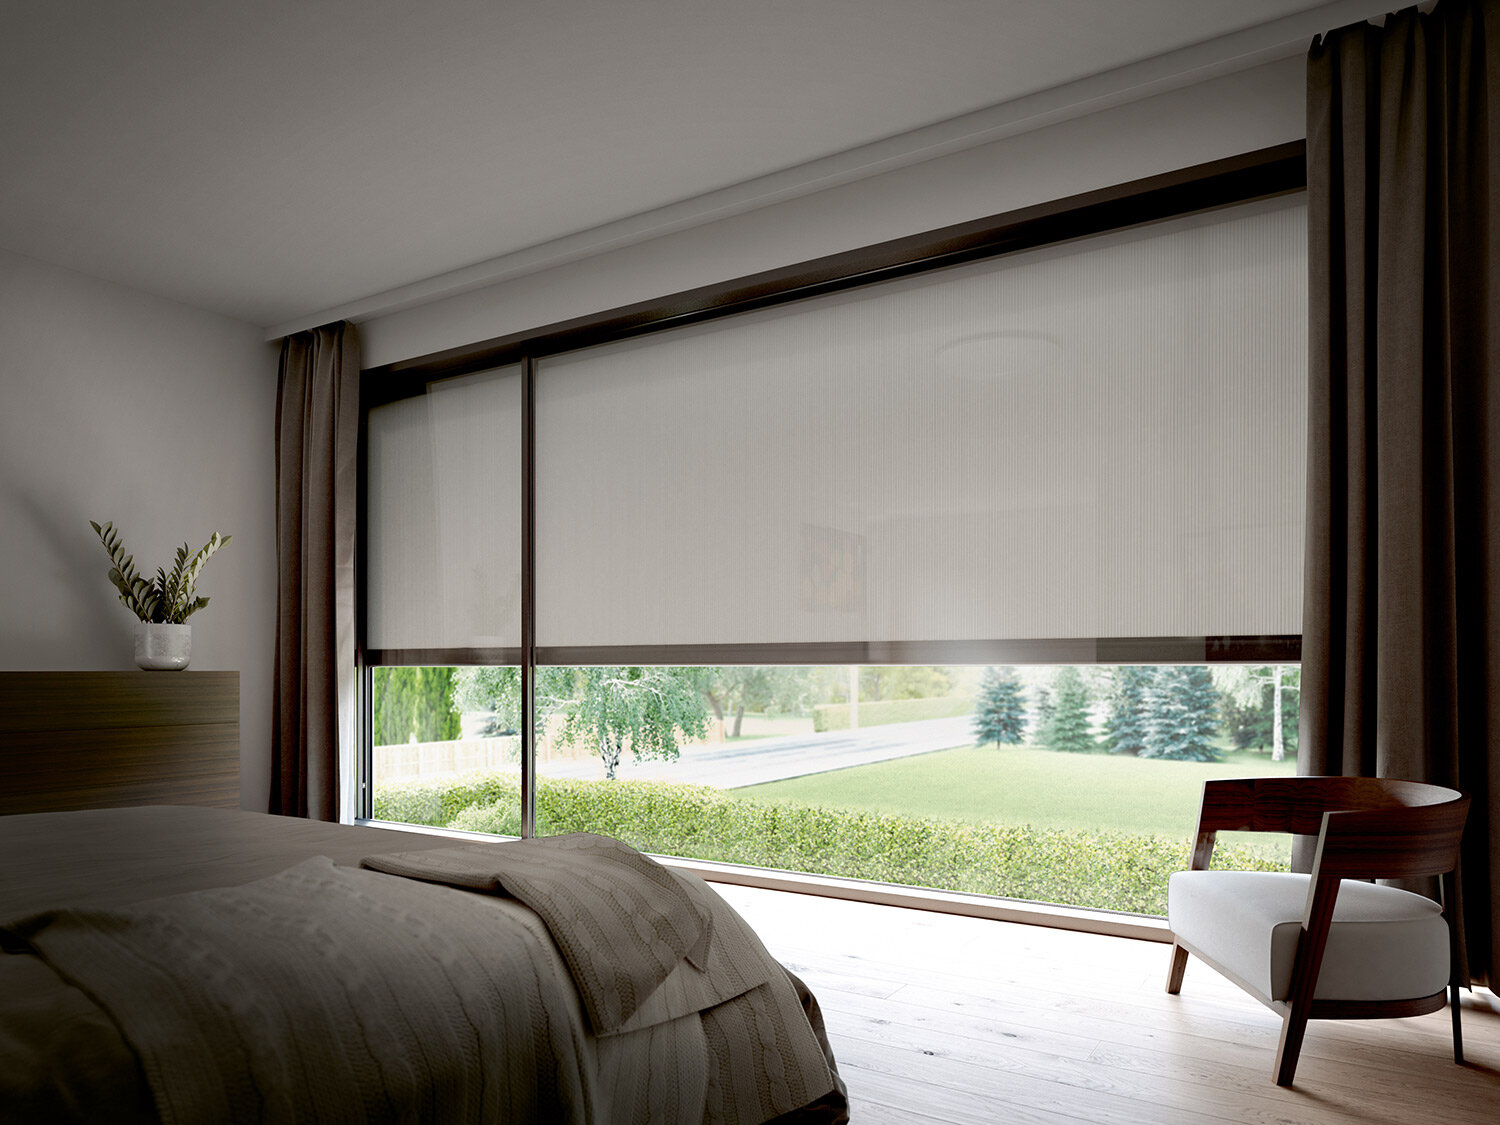 Motorised External Blinds Surrey. External blinds are ideal in situations of extreme solar gain as the blind stops the sunlight before it reaches the glass. Ideal for windows, doors and roof lights. 